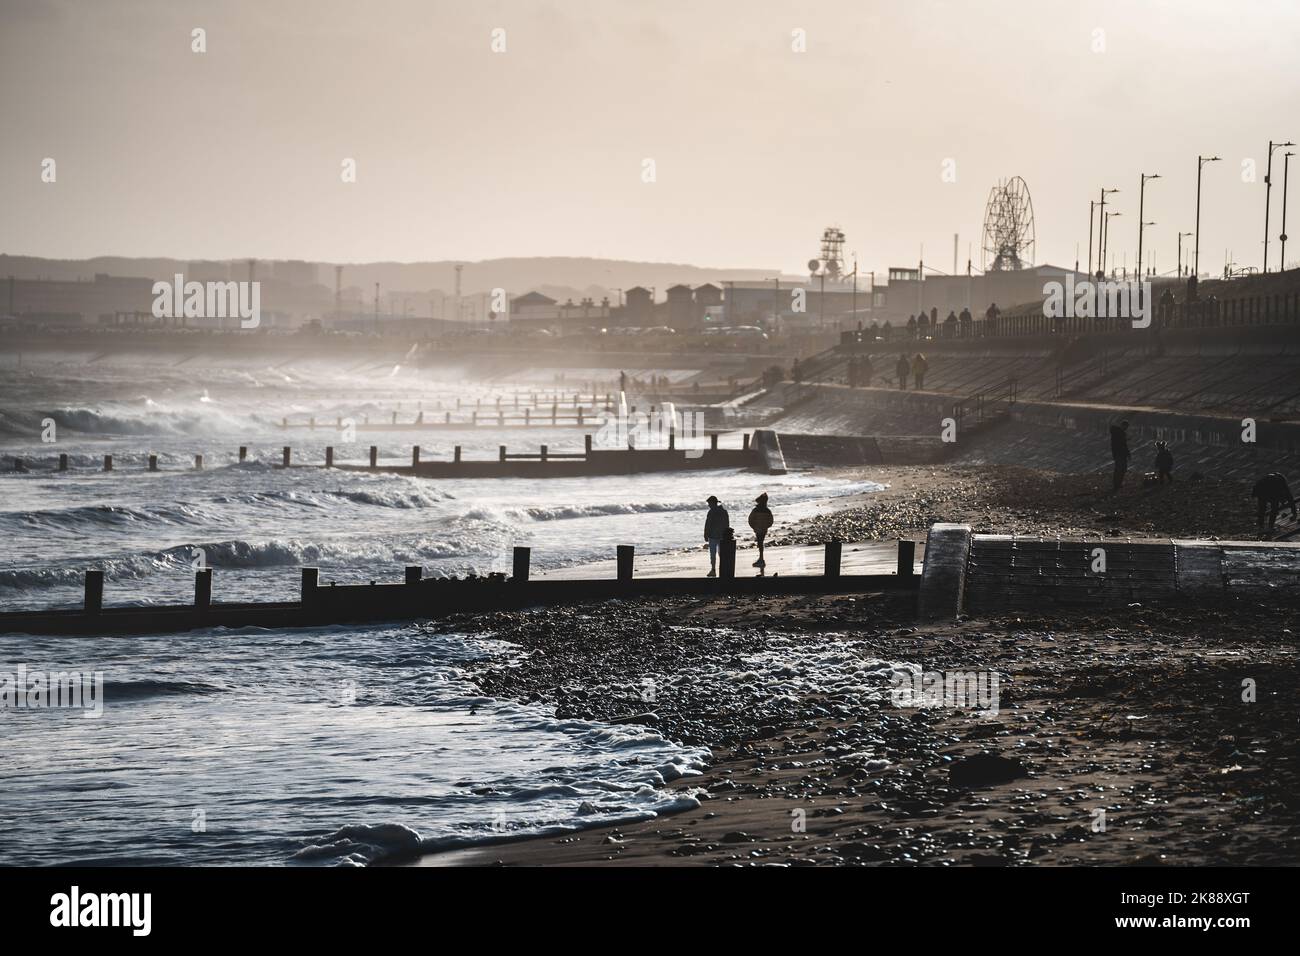 The misty afternoon at Aberdeen beach, Scotland Stock Photo